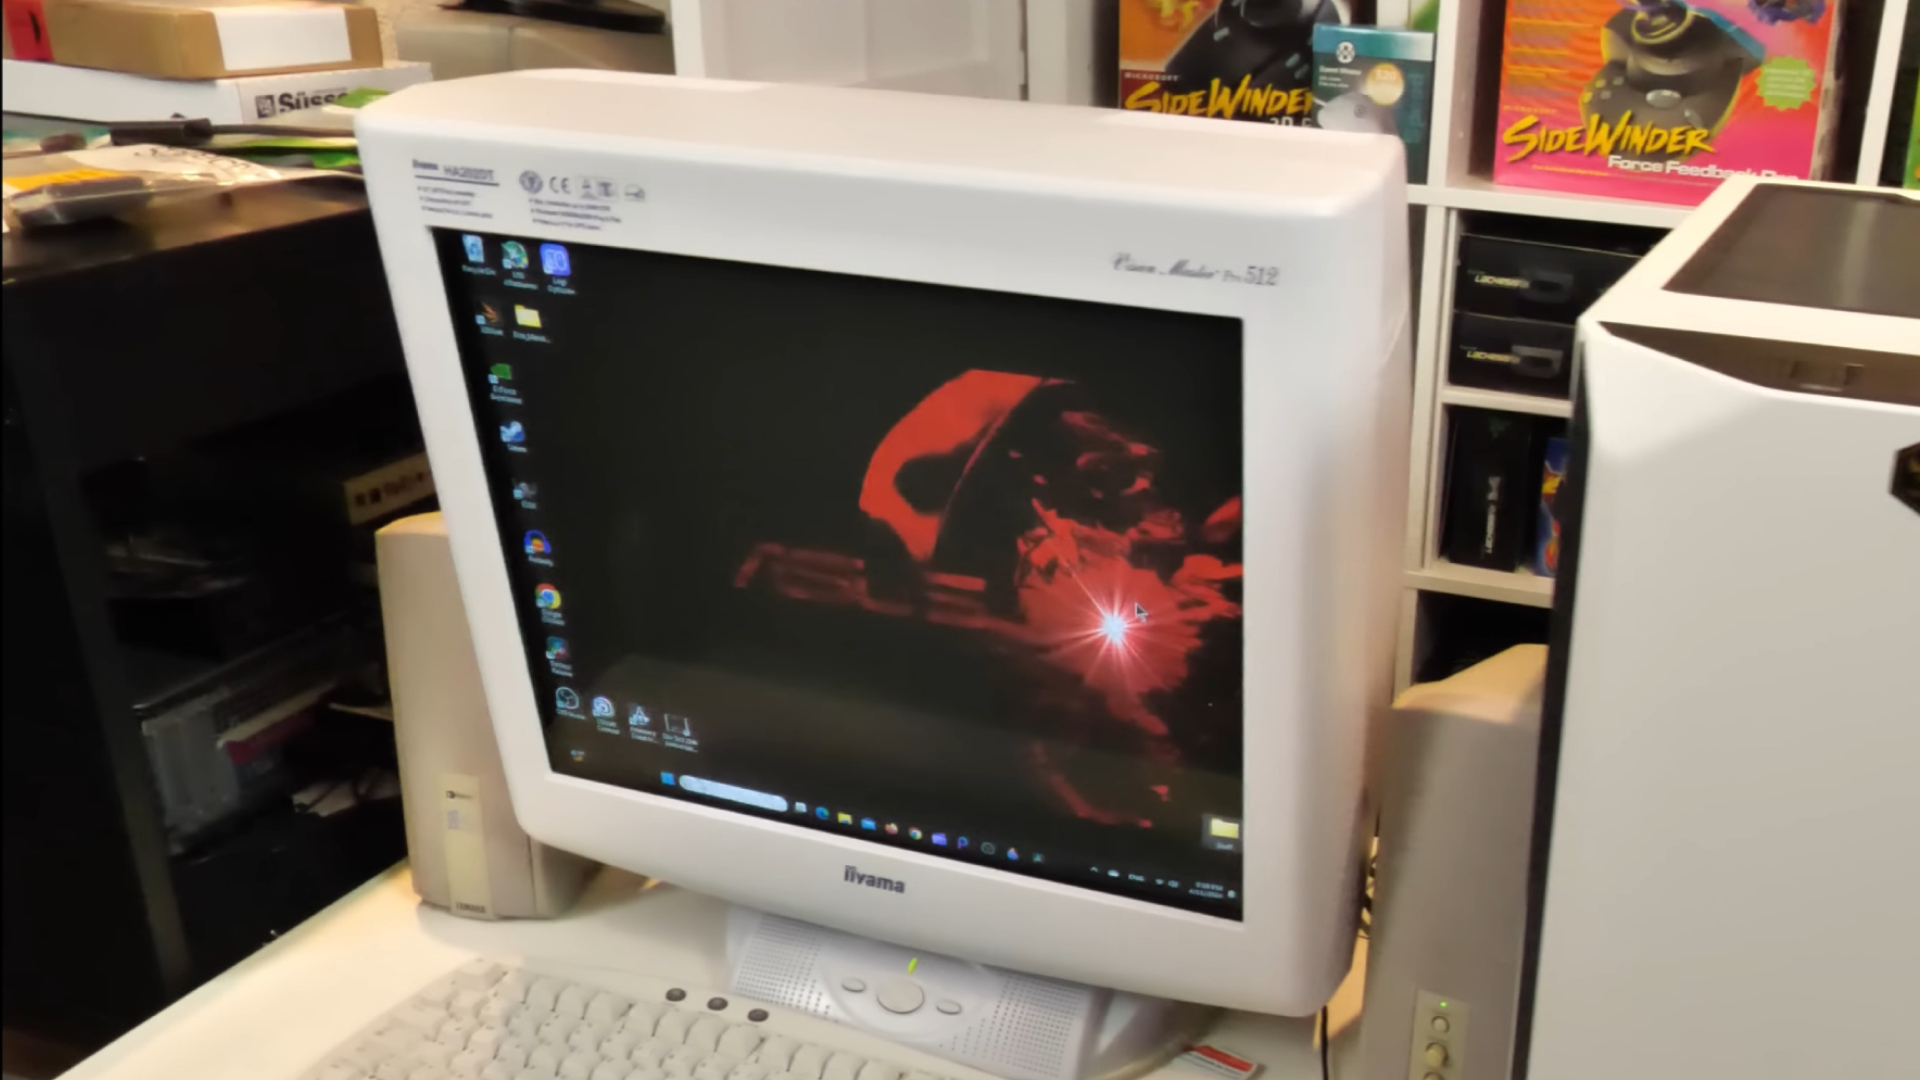  This is not a typo: The world's fastest gaming monitor may well be this ancient IIyama CRT unit, pushed to 700 Hz at a glorious 120p resolution 